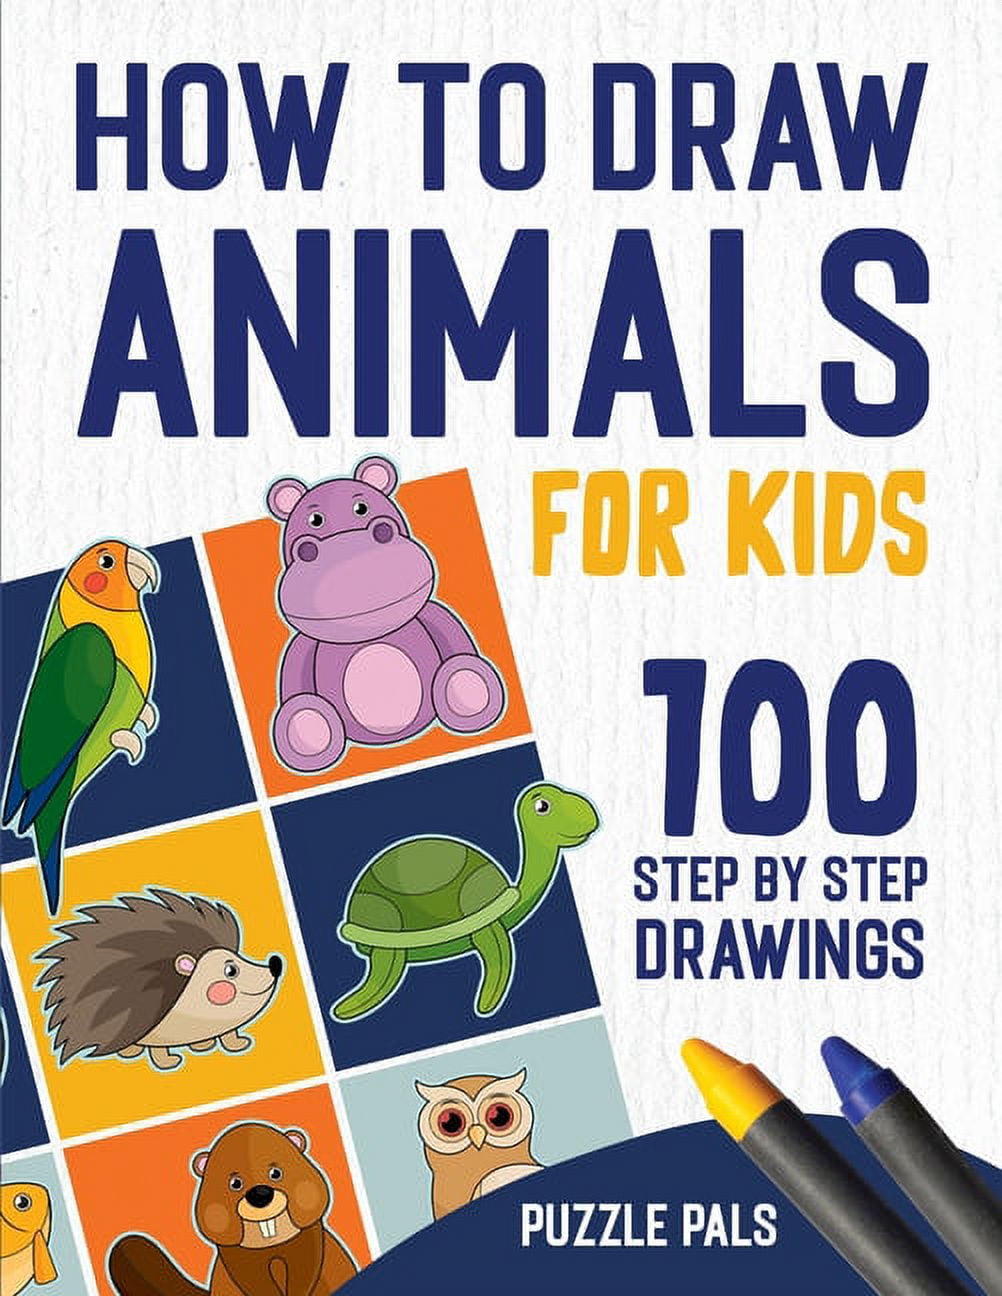 How To Draw Animals: 100 Step By Step Drawings For Kids (Paperback